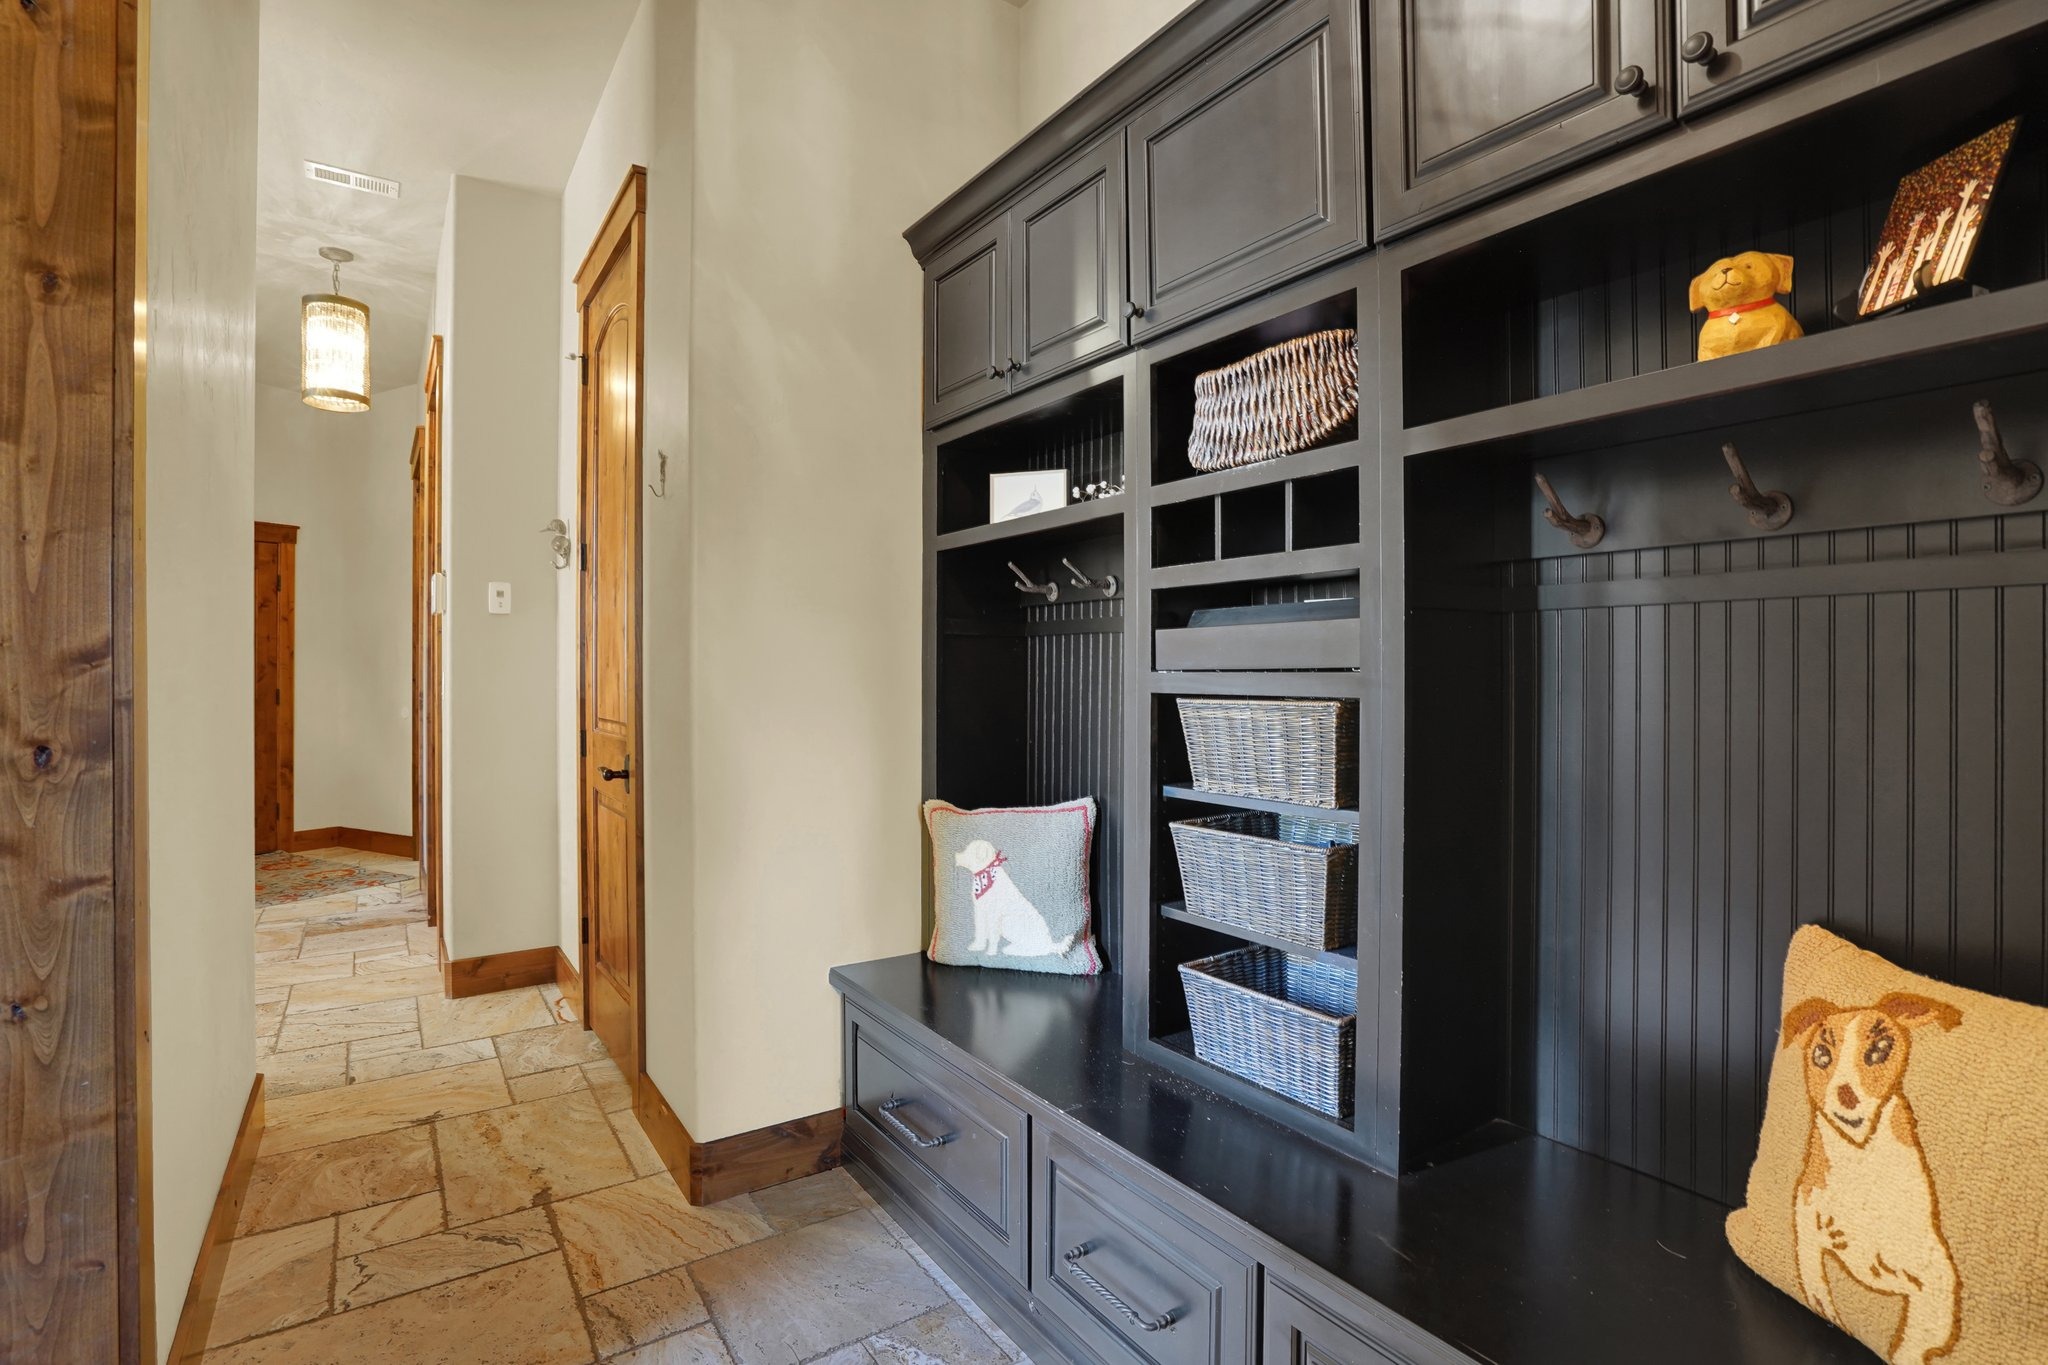 Great Custom Built-Ins in the Laundry/Garage Entry!